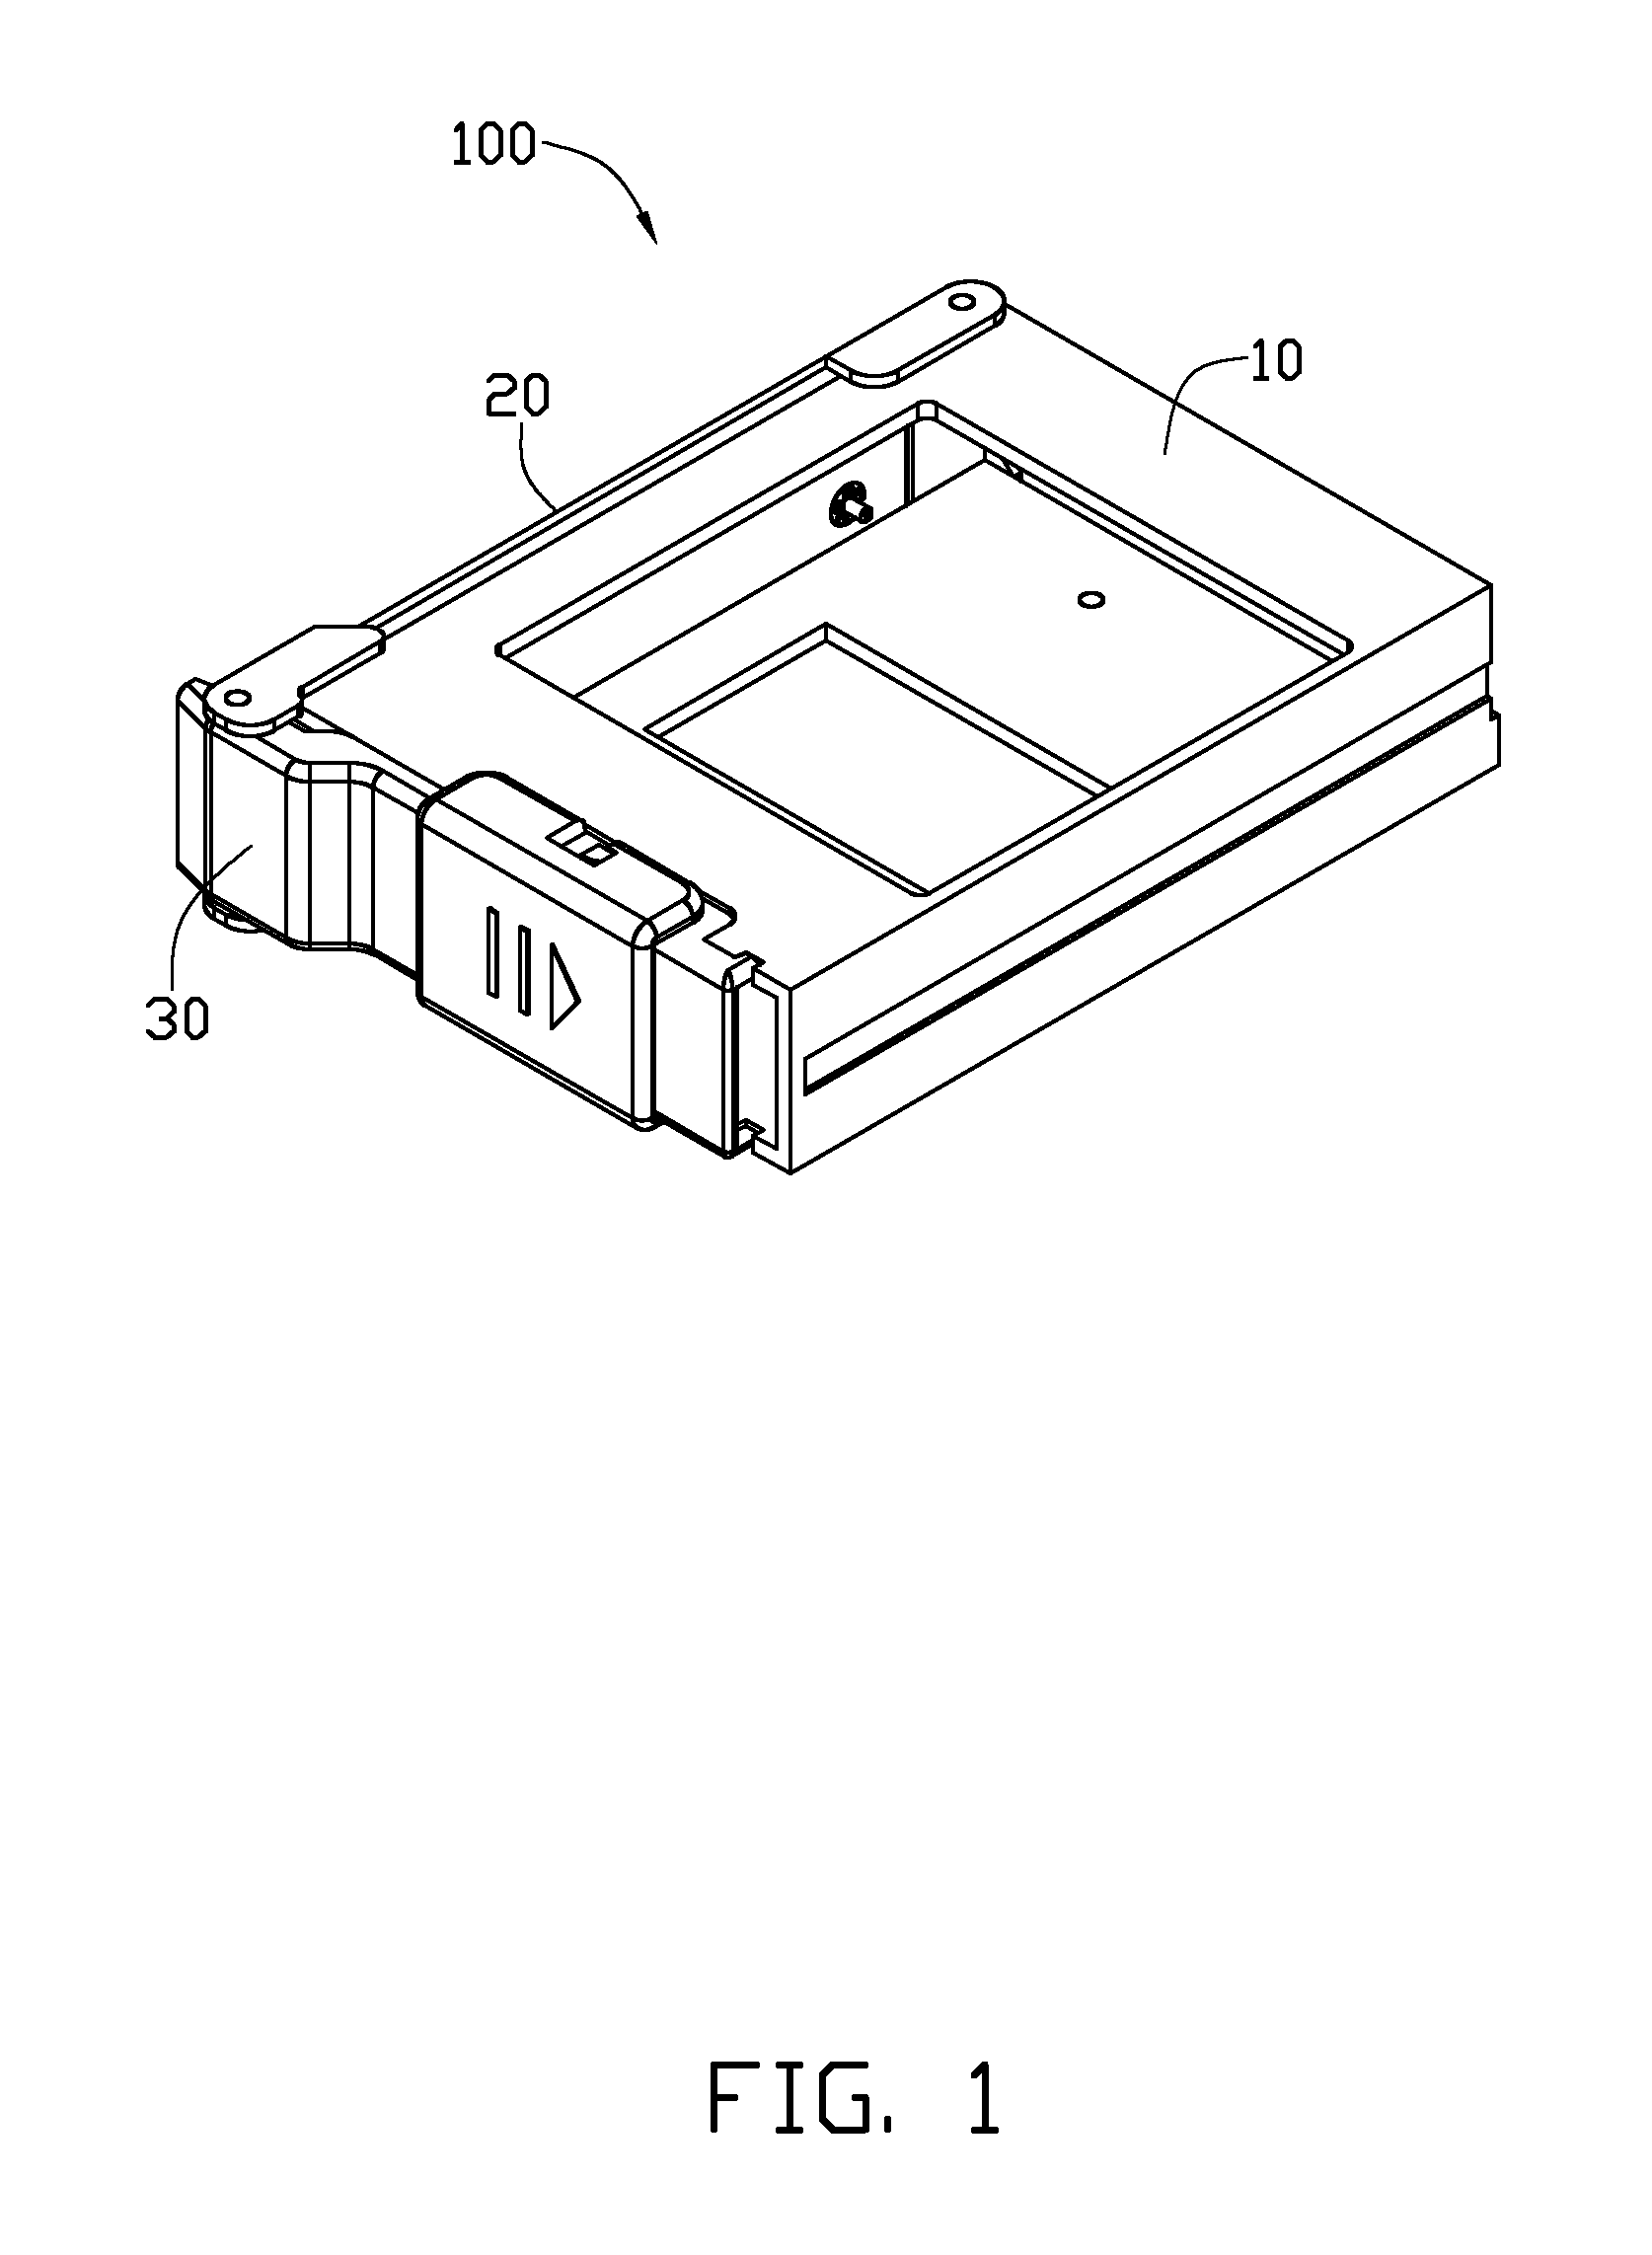 Housing with rotation arm and panel for securing hard disk drive therein